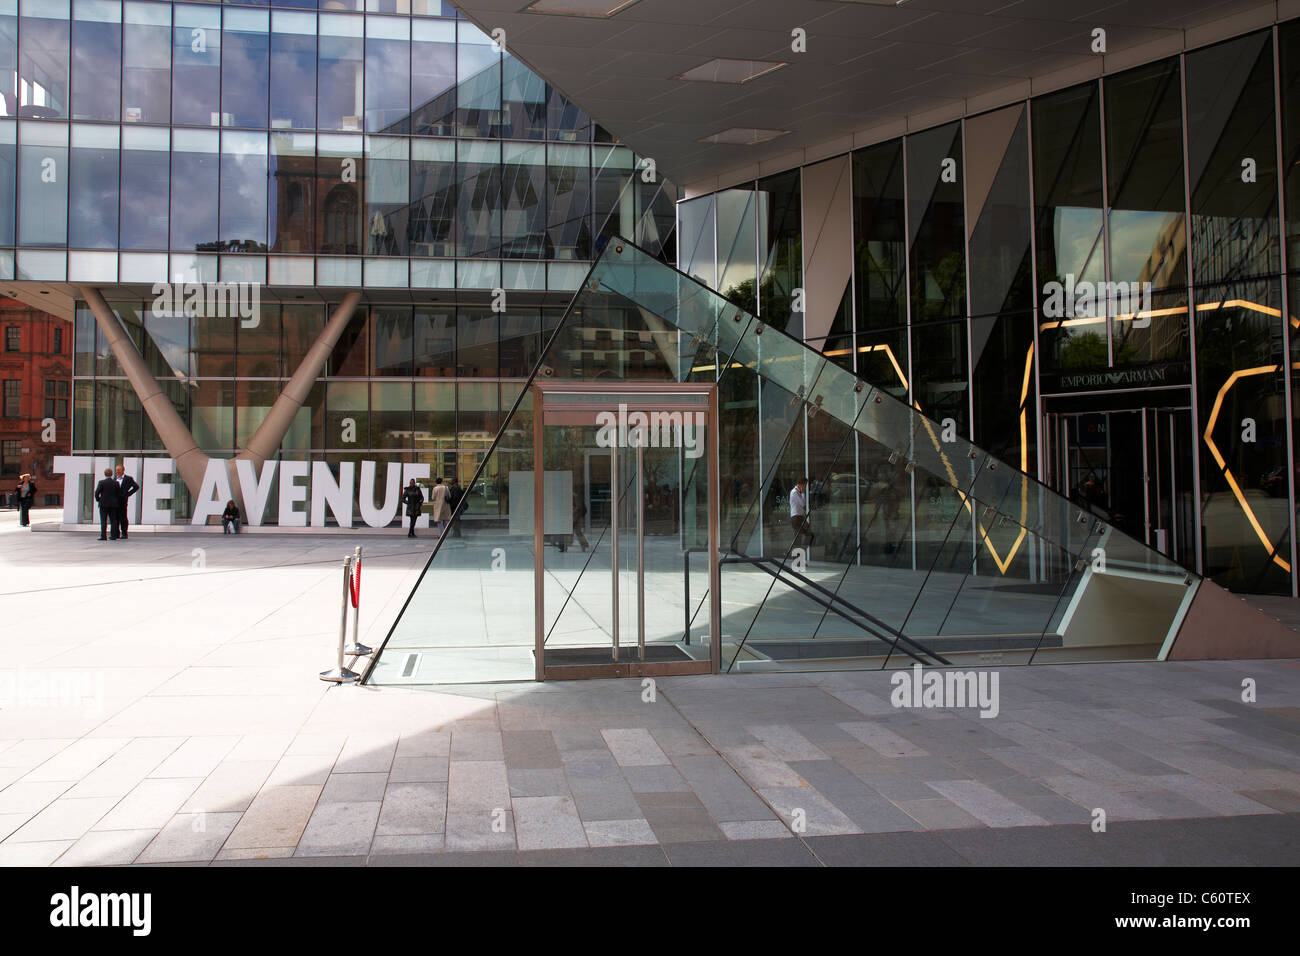 Entrance to Australasia restaurant bar in front of Armani store in Spinningfields Manchester UK Stock Photo